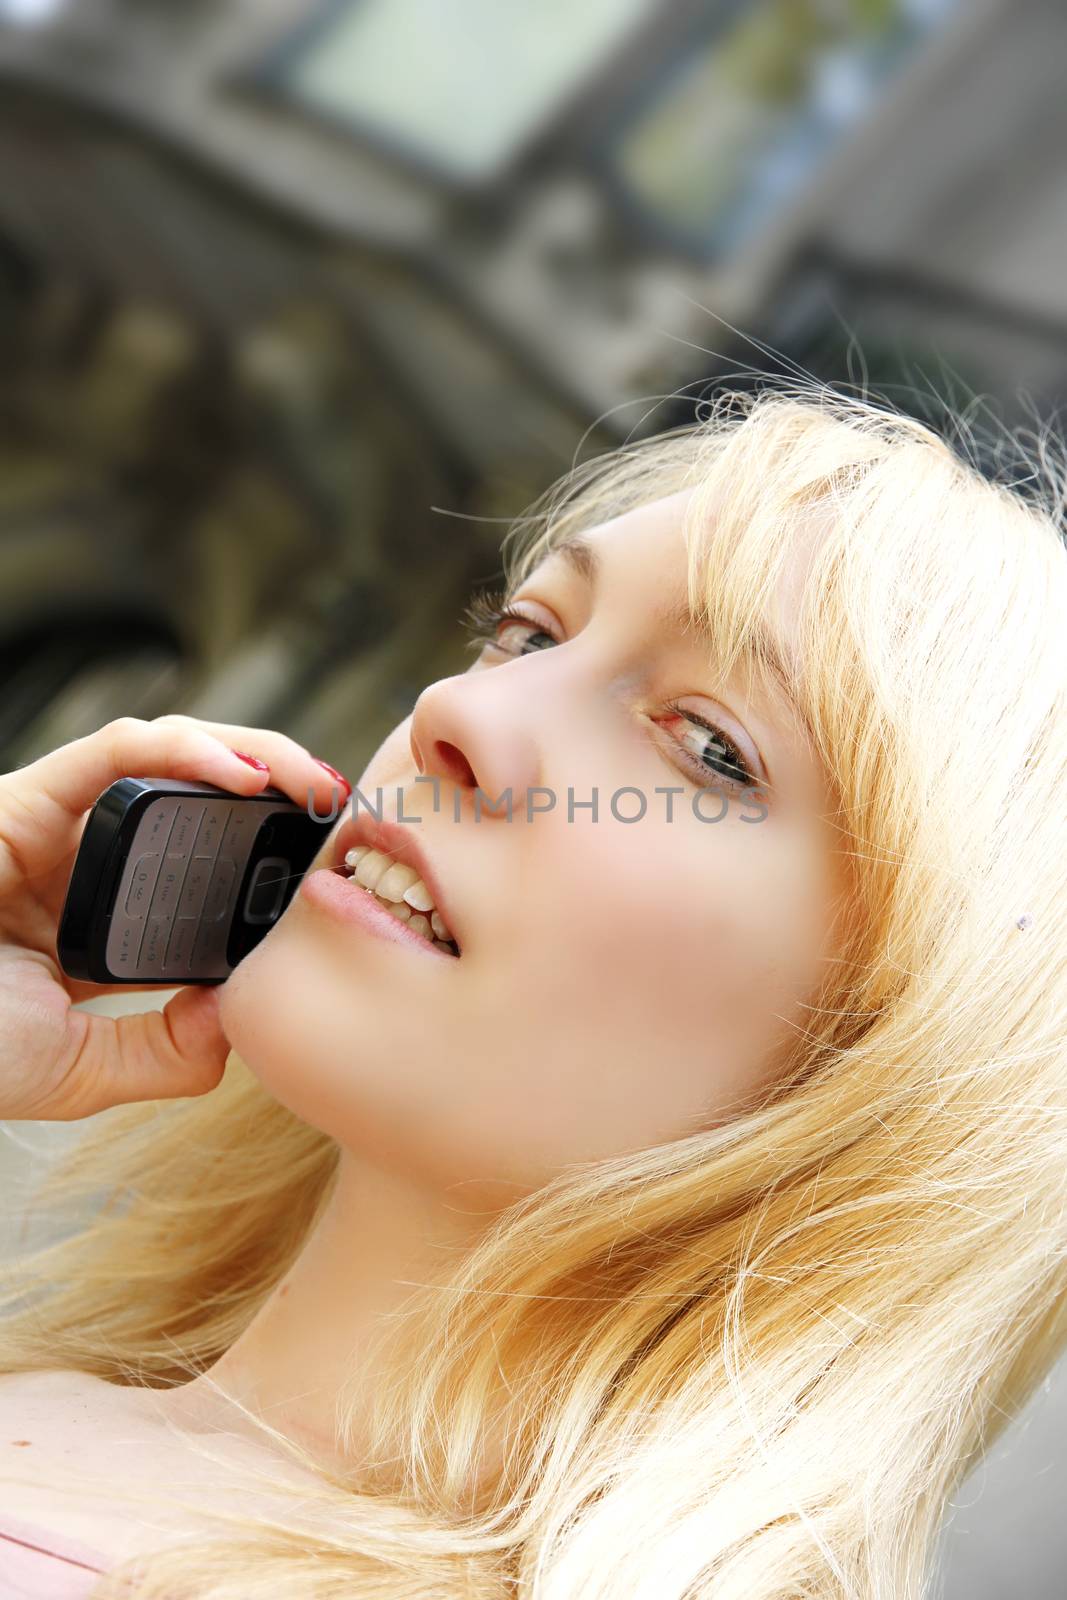 A young adult woman talking on the phone.